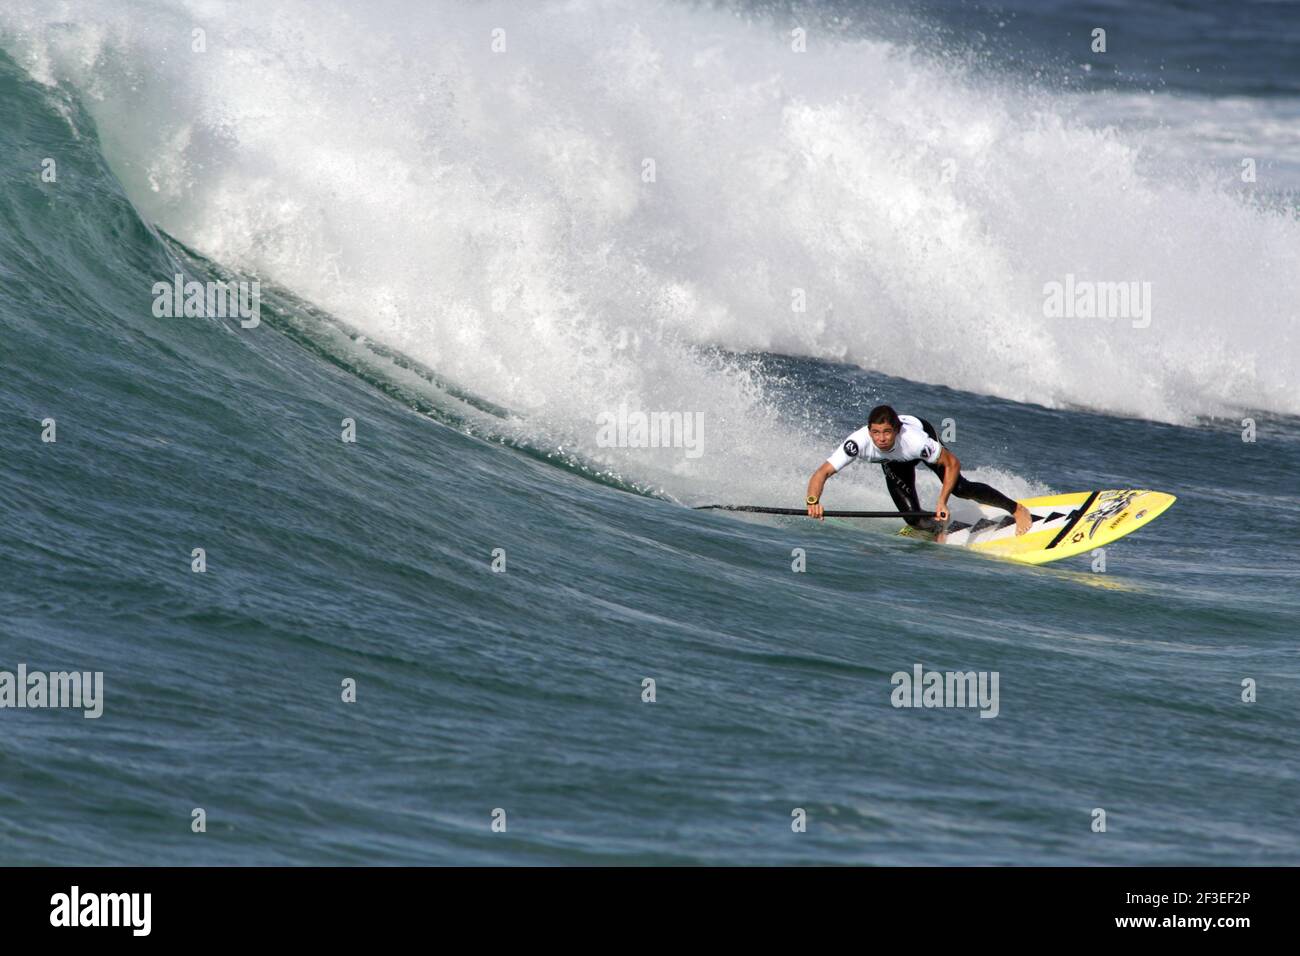 Julien Bouyer (Fra) in action during the qualification for the main event of the Stand Up Paddle World Cup held in La Torche (West France) from October 26 to November 3, 2013 - Photo Erwan Crouan / DPPI - Stock Photo